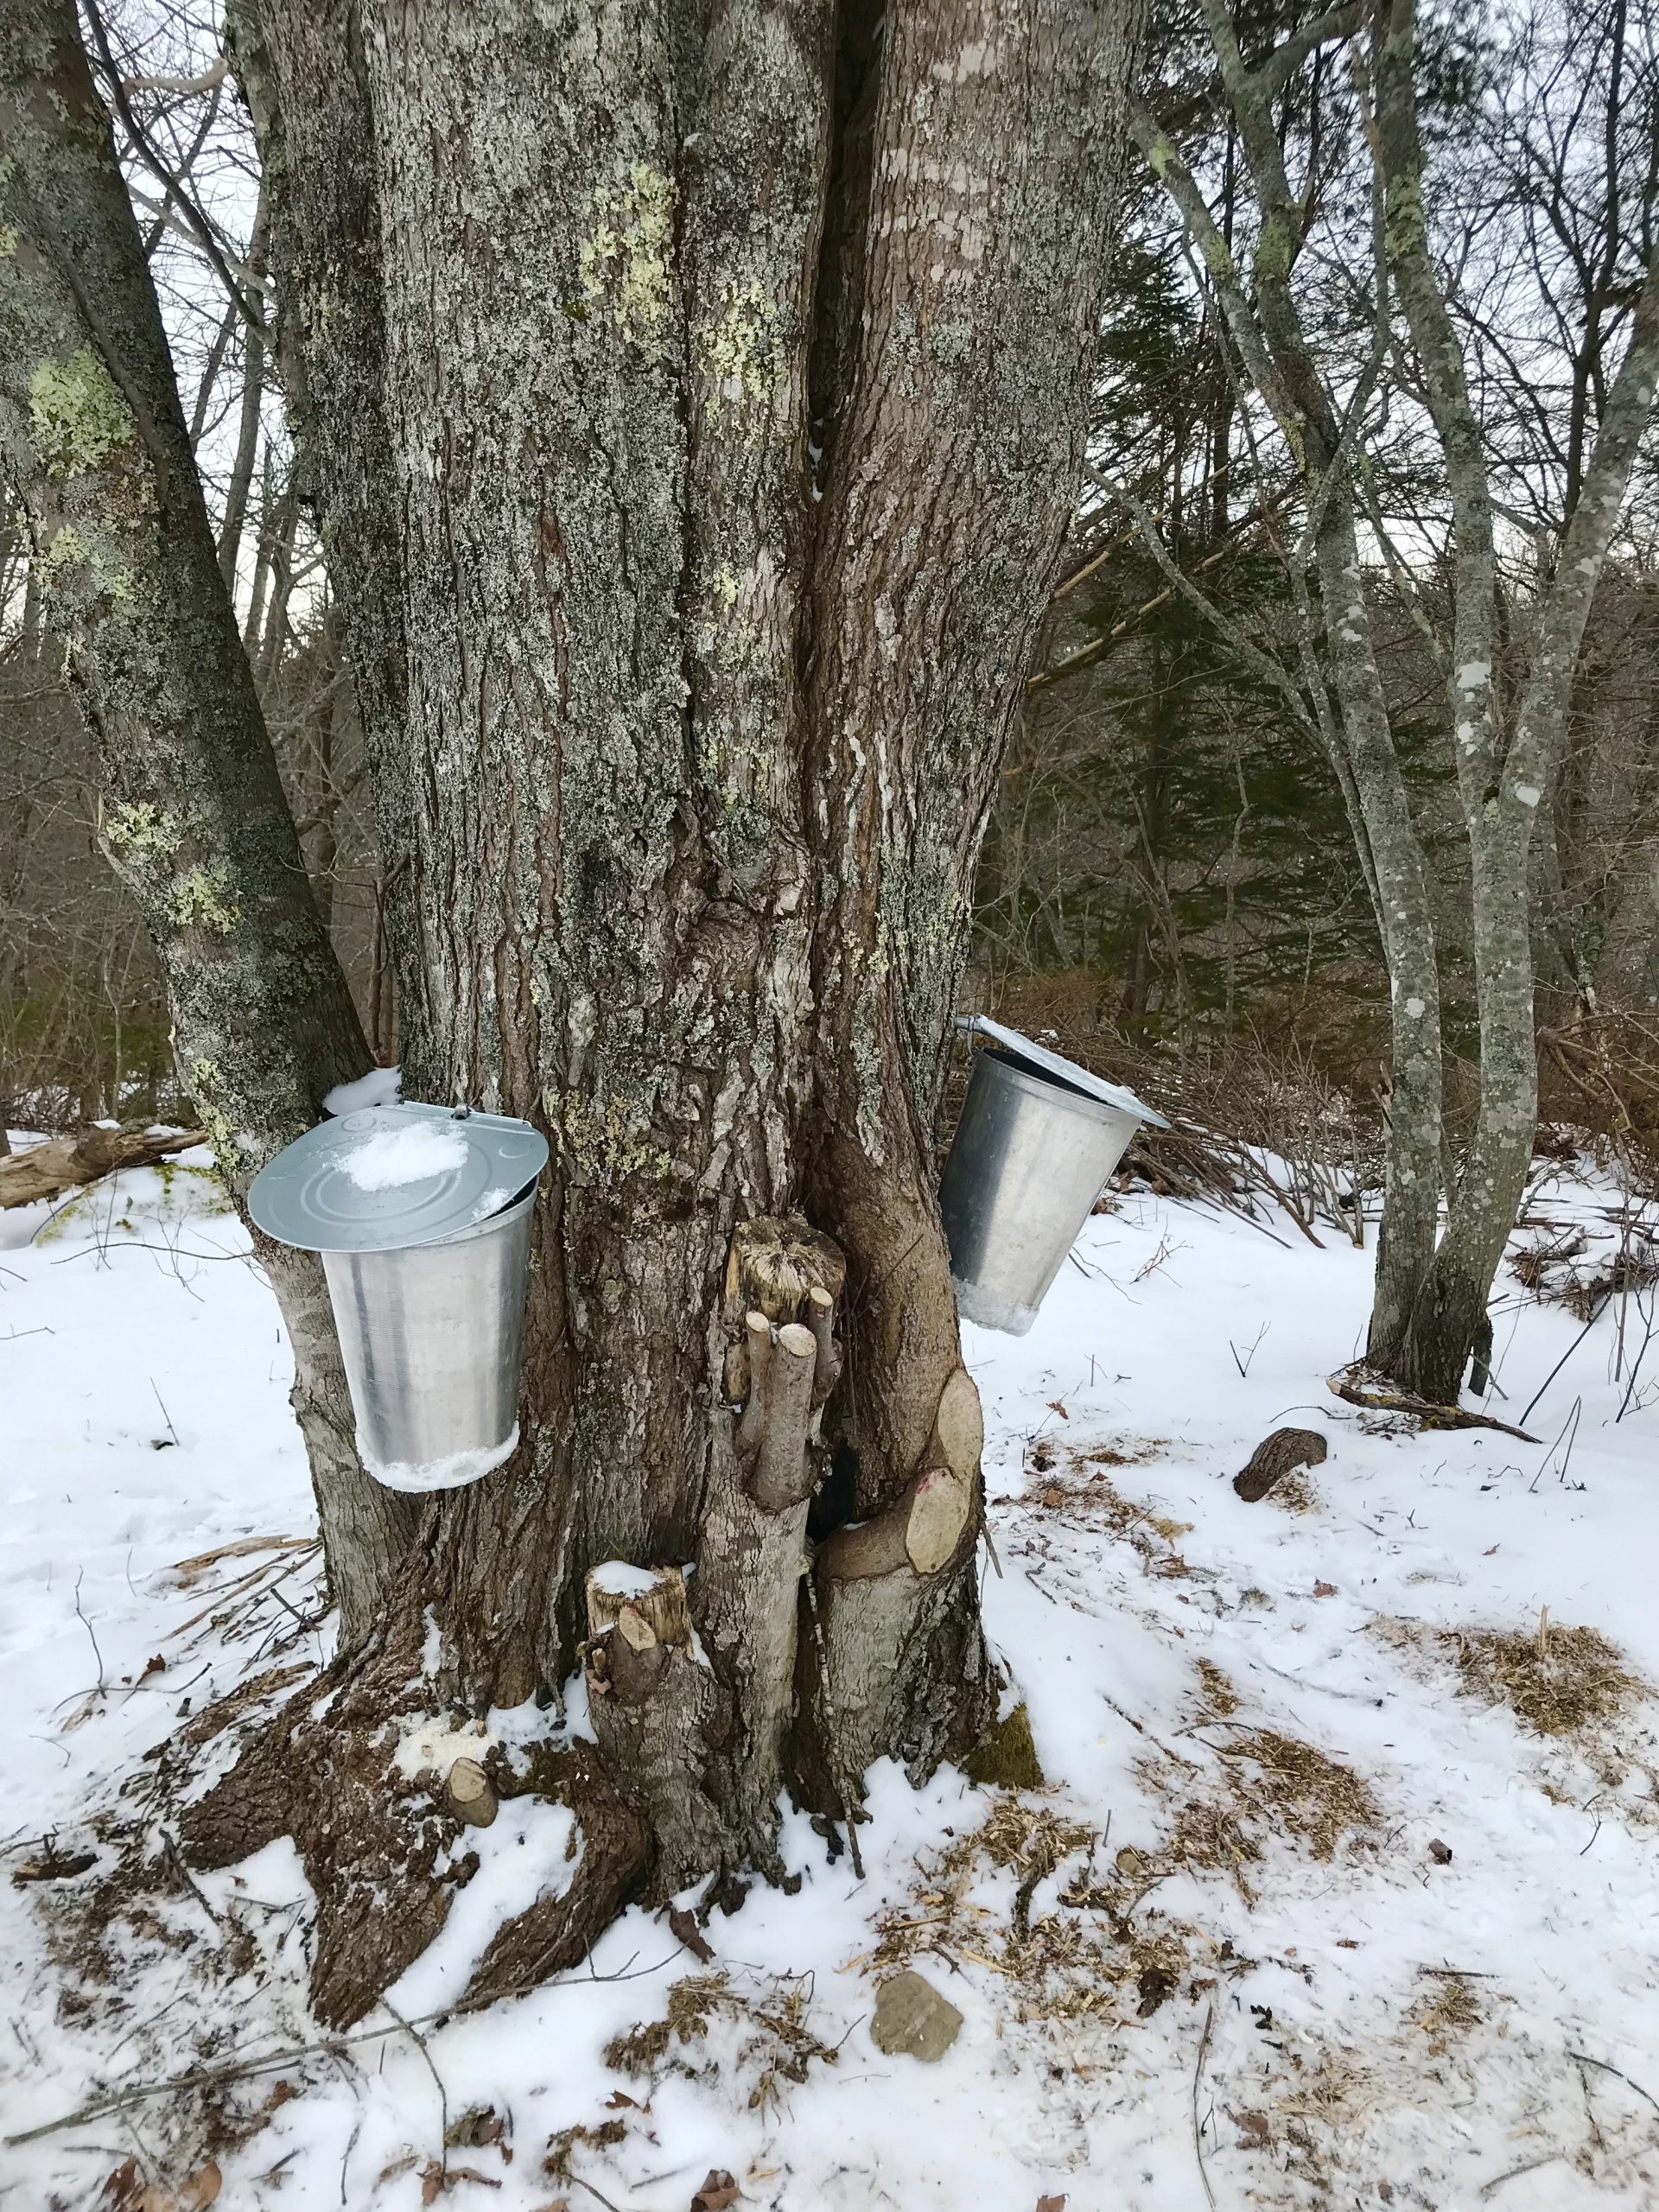 Tapping Maple Trees For the First Time